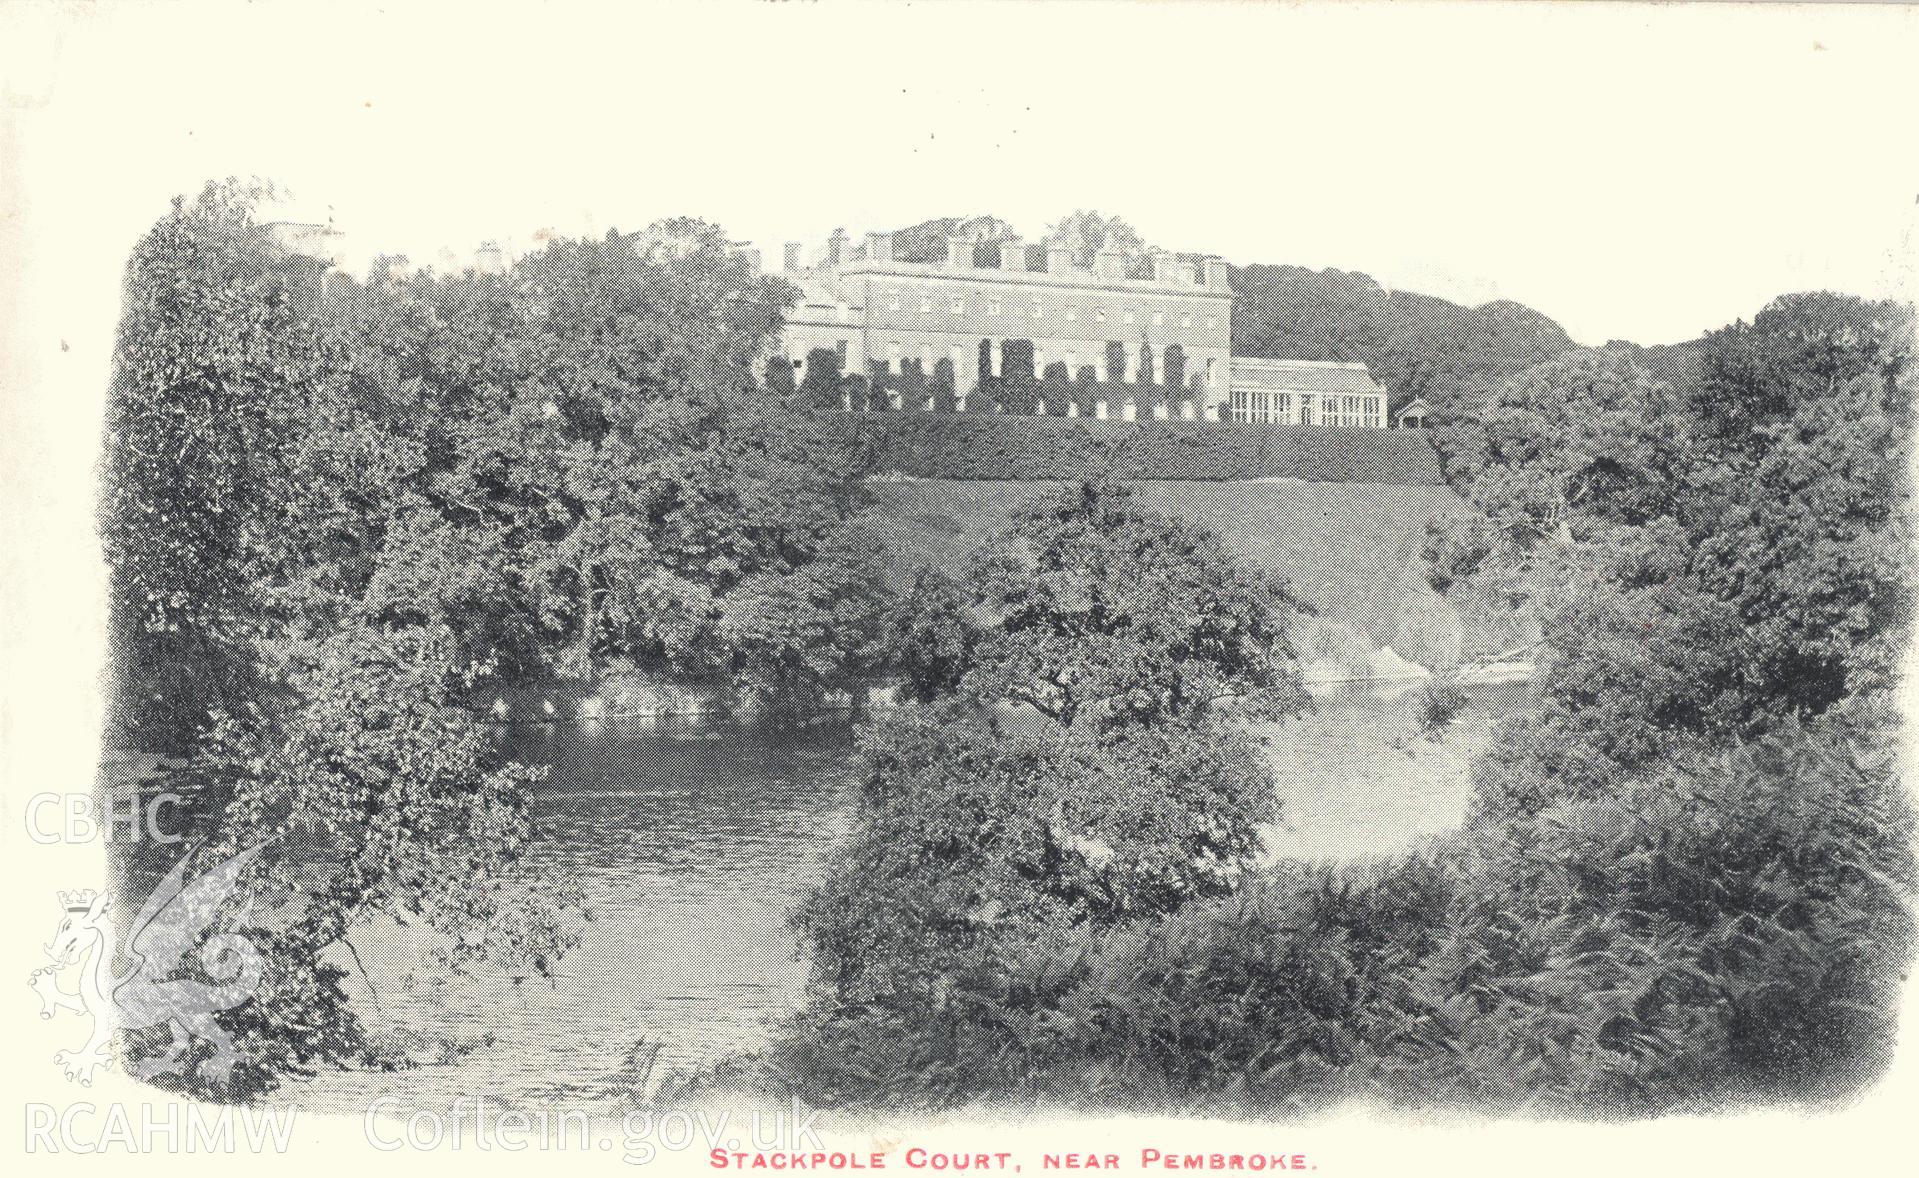 Digitised postcard image of Stackpole Court, Stackpole. Produced by Parks and Gardens Data Services, from an original item in the Peter Davis Collection at Parks and Gardens UK. We hold only web-resolution images of this collection, suitable for viewing on screen and for research purposes only. We do not hold the original images, or publication quality scans.